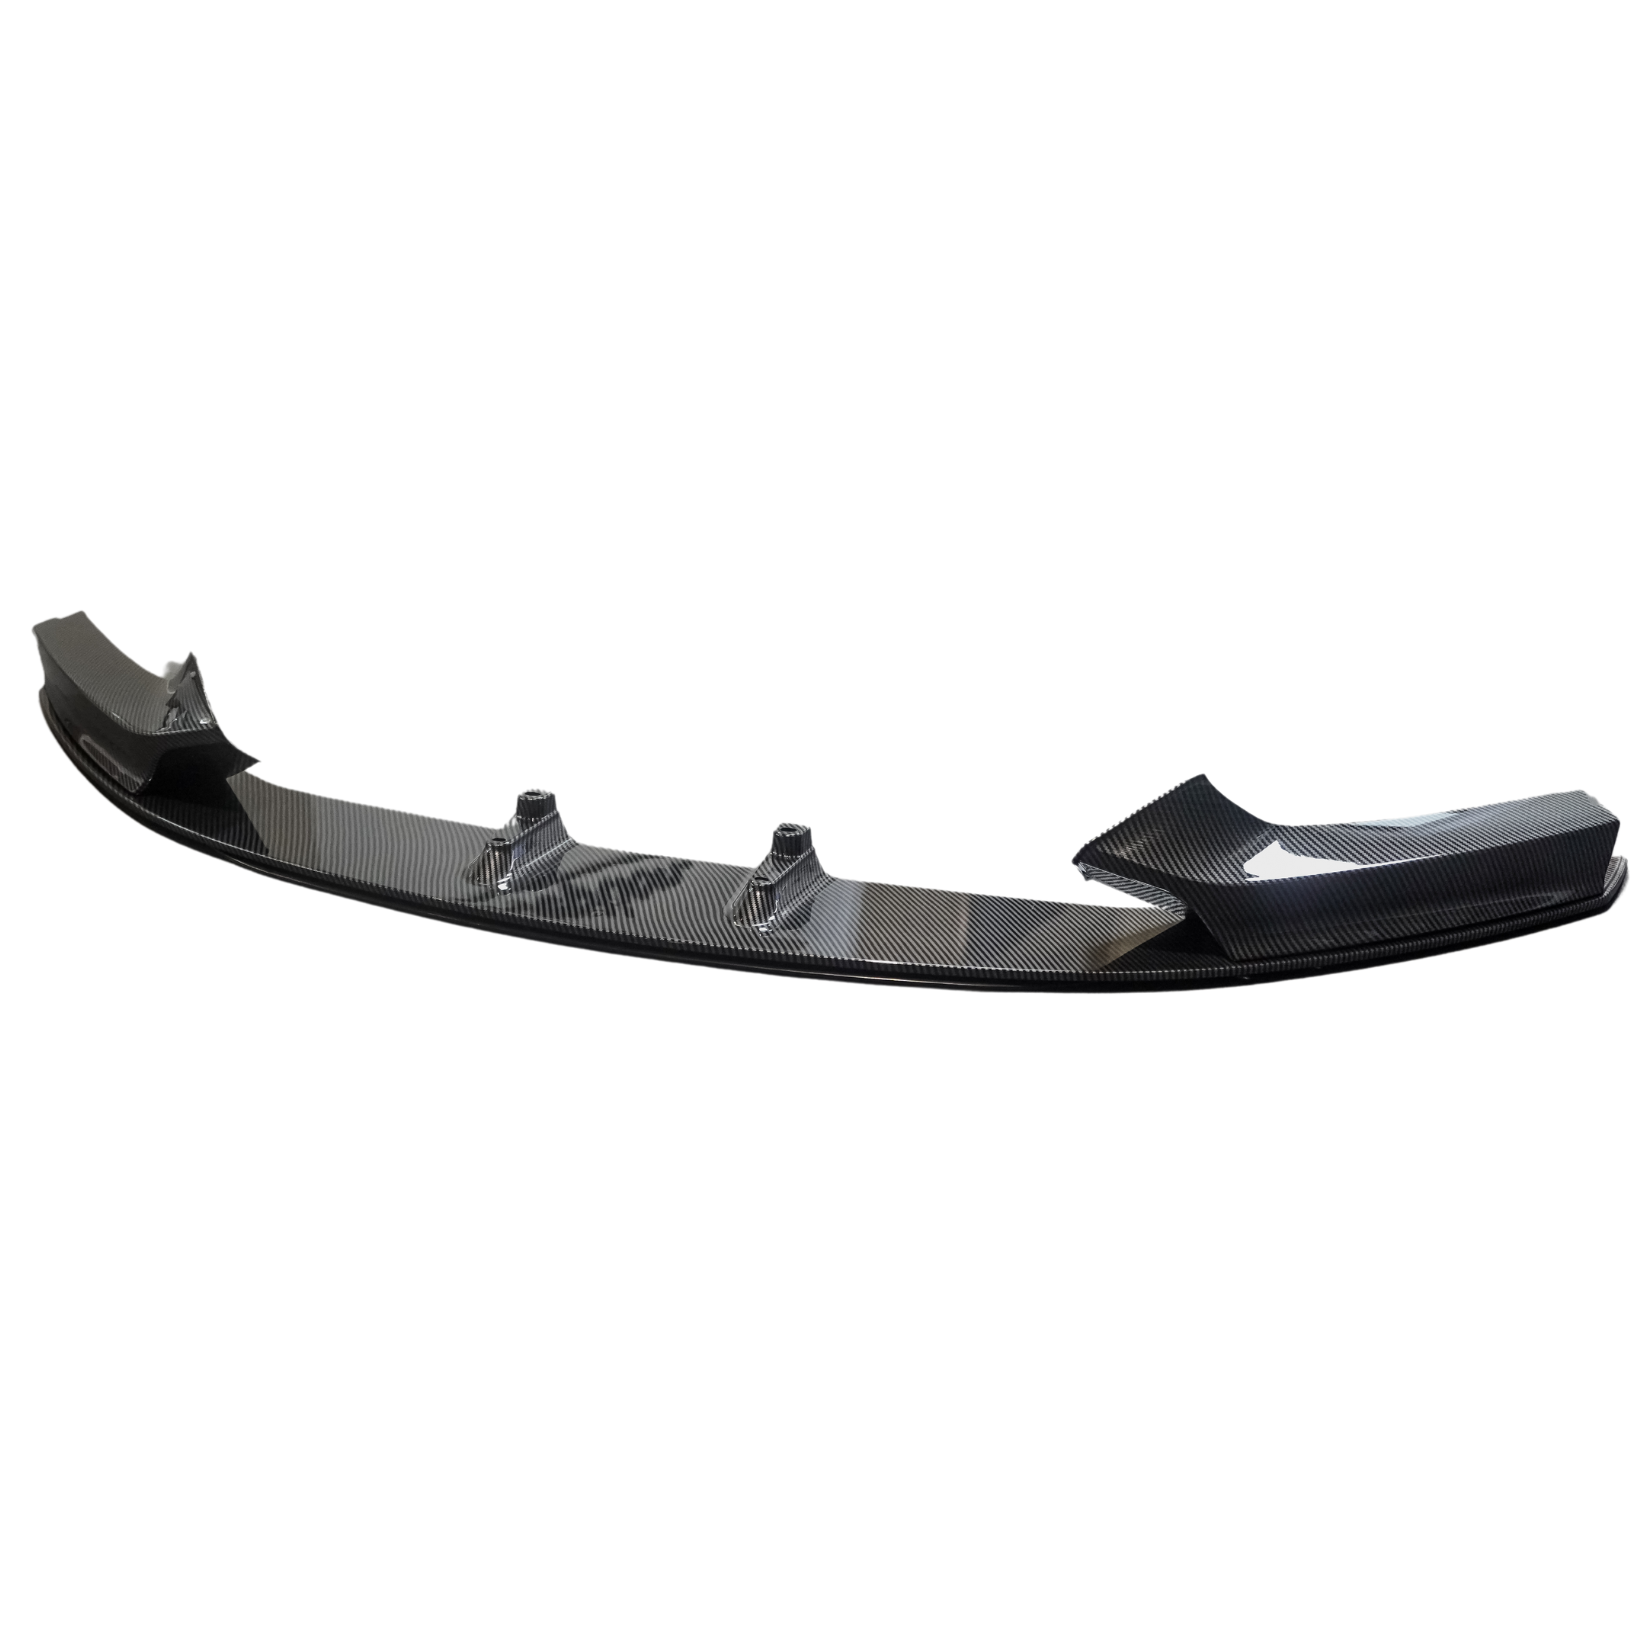 Bmw 2 Series F22 2014-2021 Front Splitter In Carbon Look